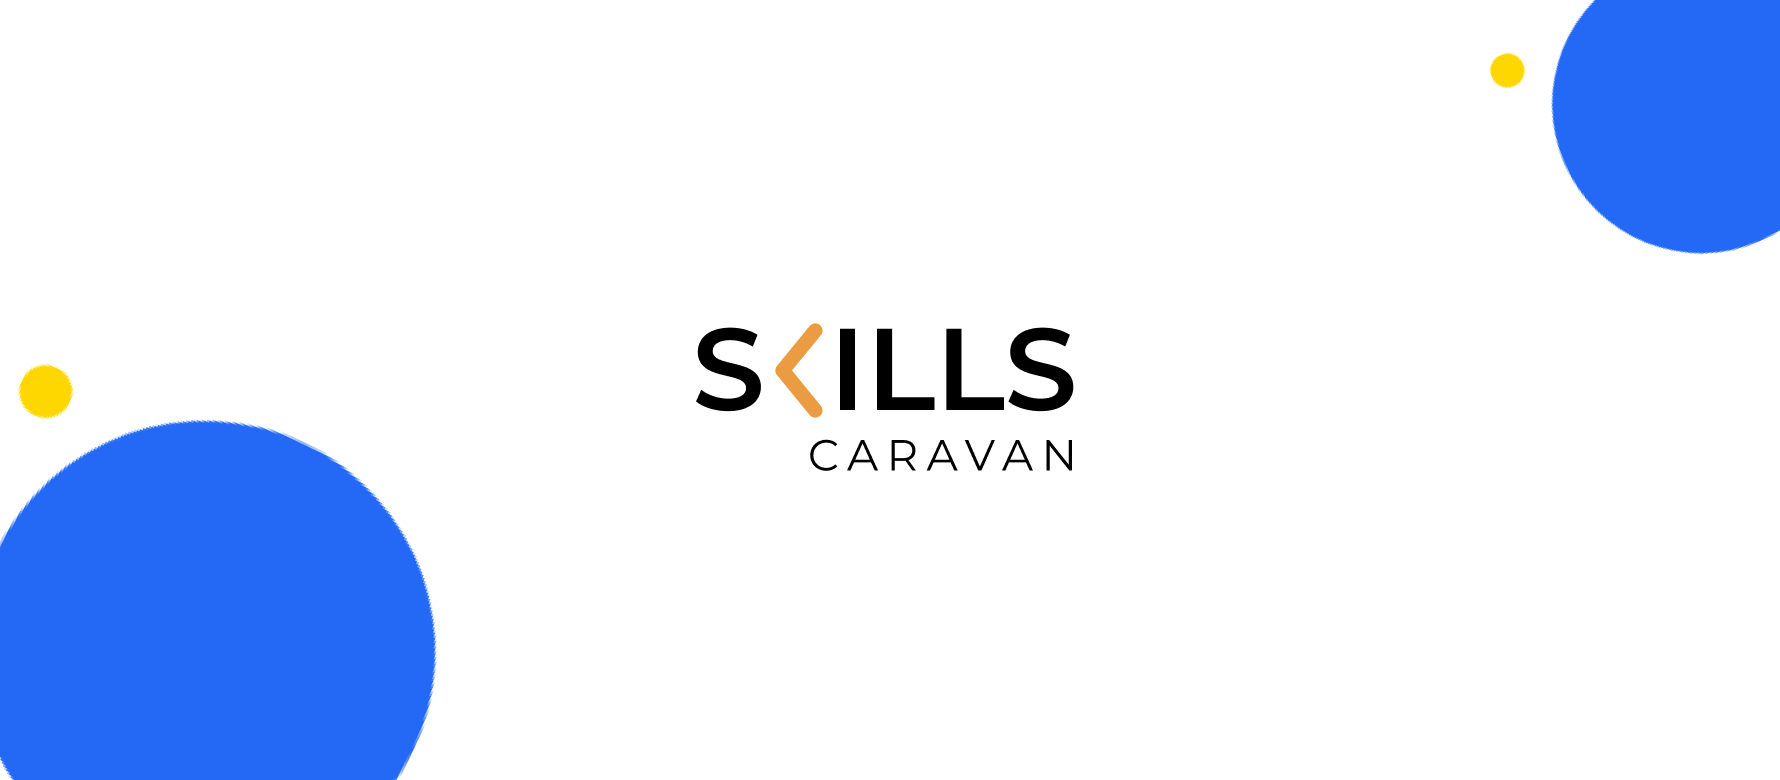 Case Study | Dashboard screen design of Skills Caravan, a B2B Learning Experience EdTech Platform (LXP) based out in India